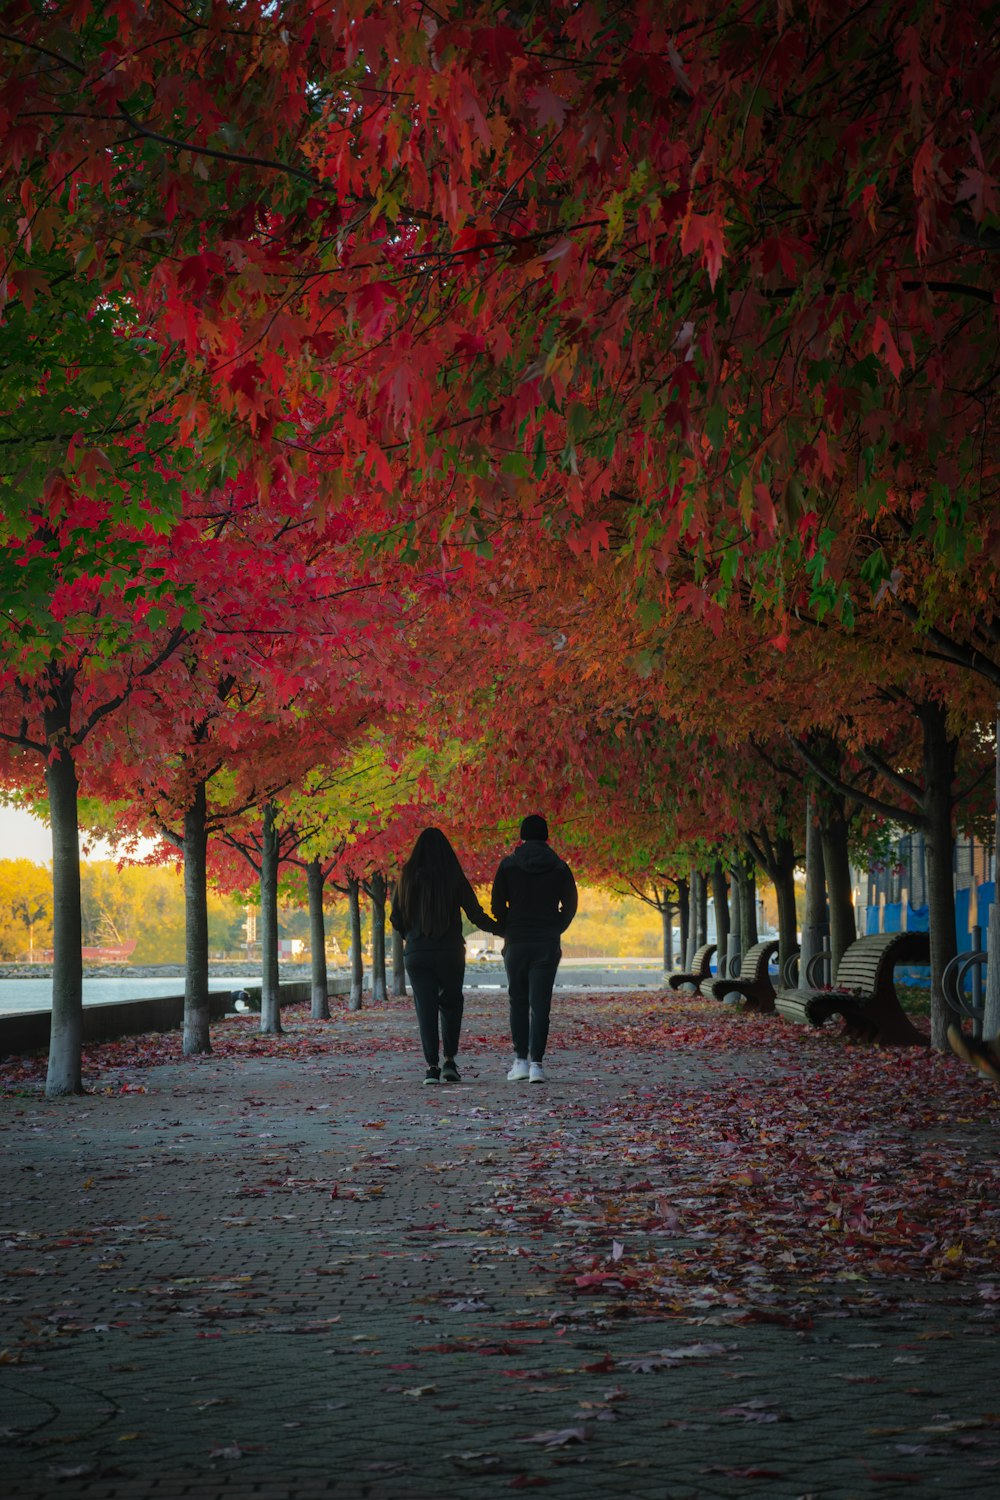 two people walking down a path under a canopy of trees